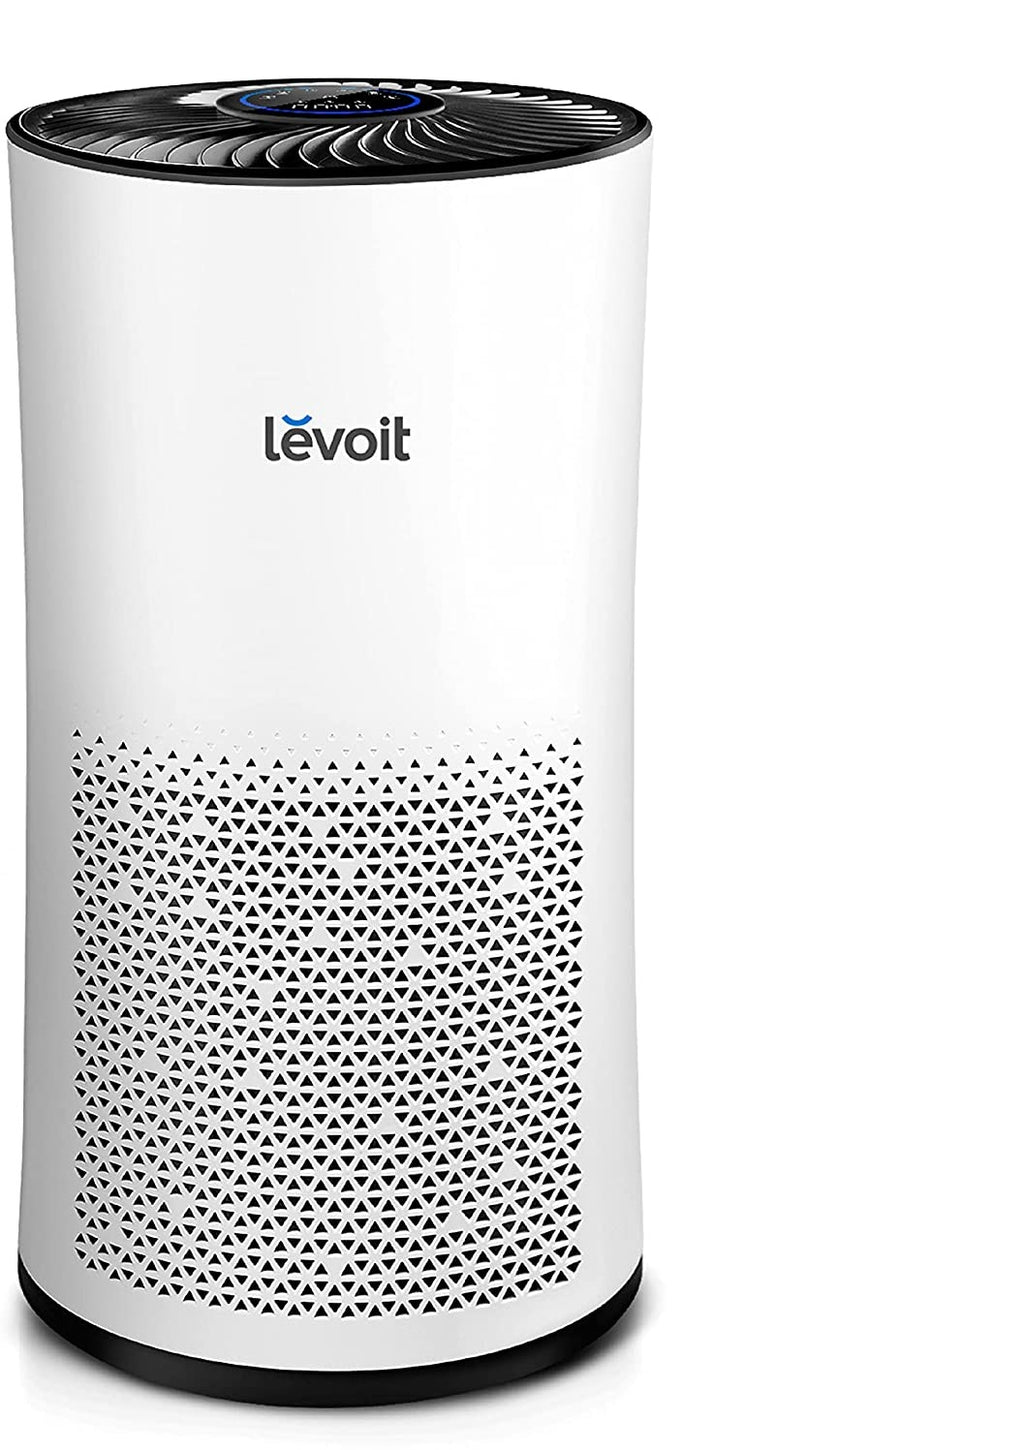 LEVOIT Air Purifier for Home Large Room, H13 True HEPA Filter for Bedroom